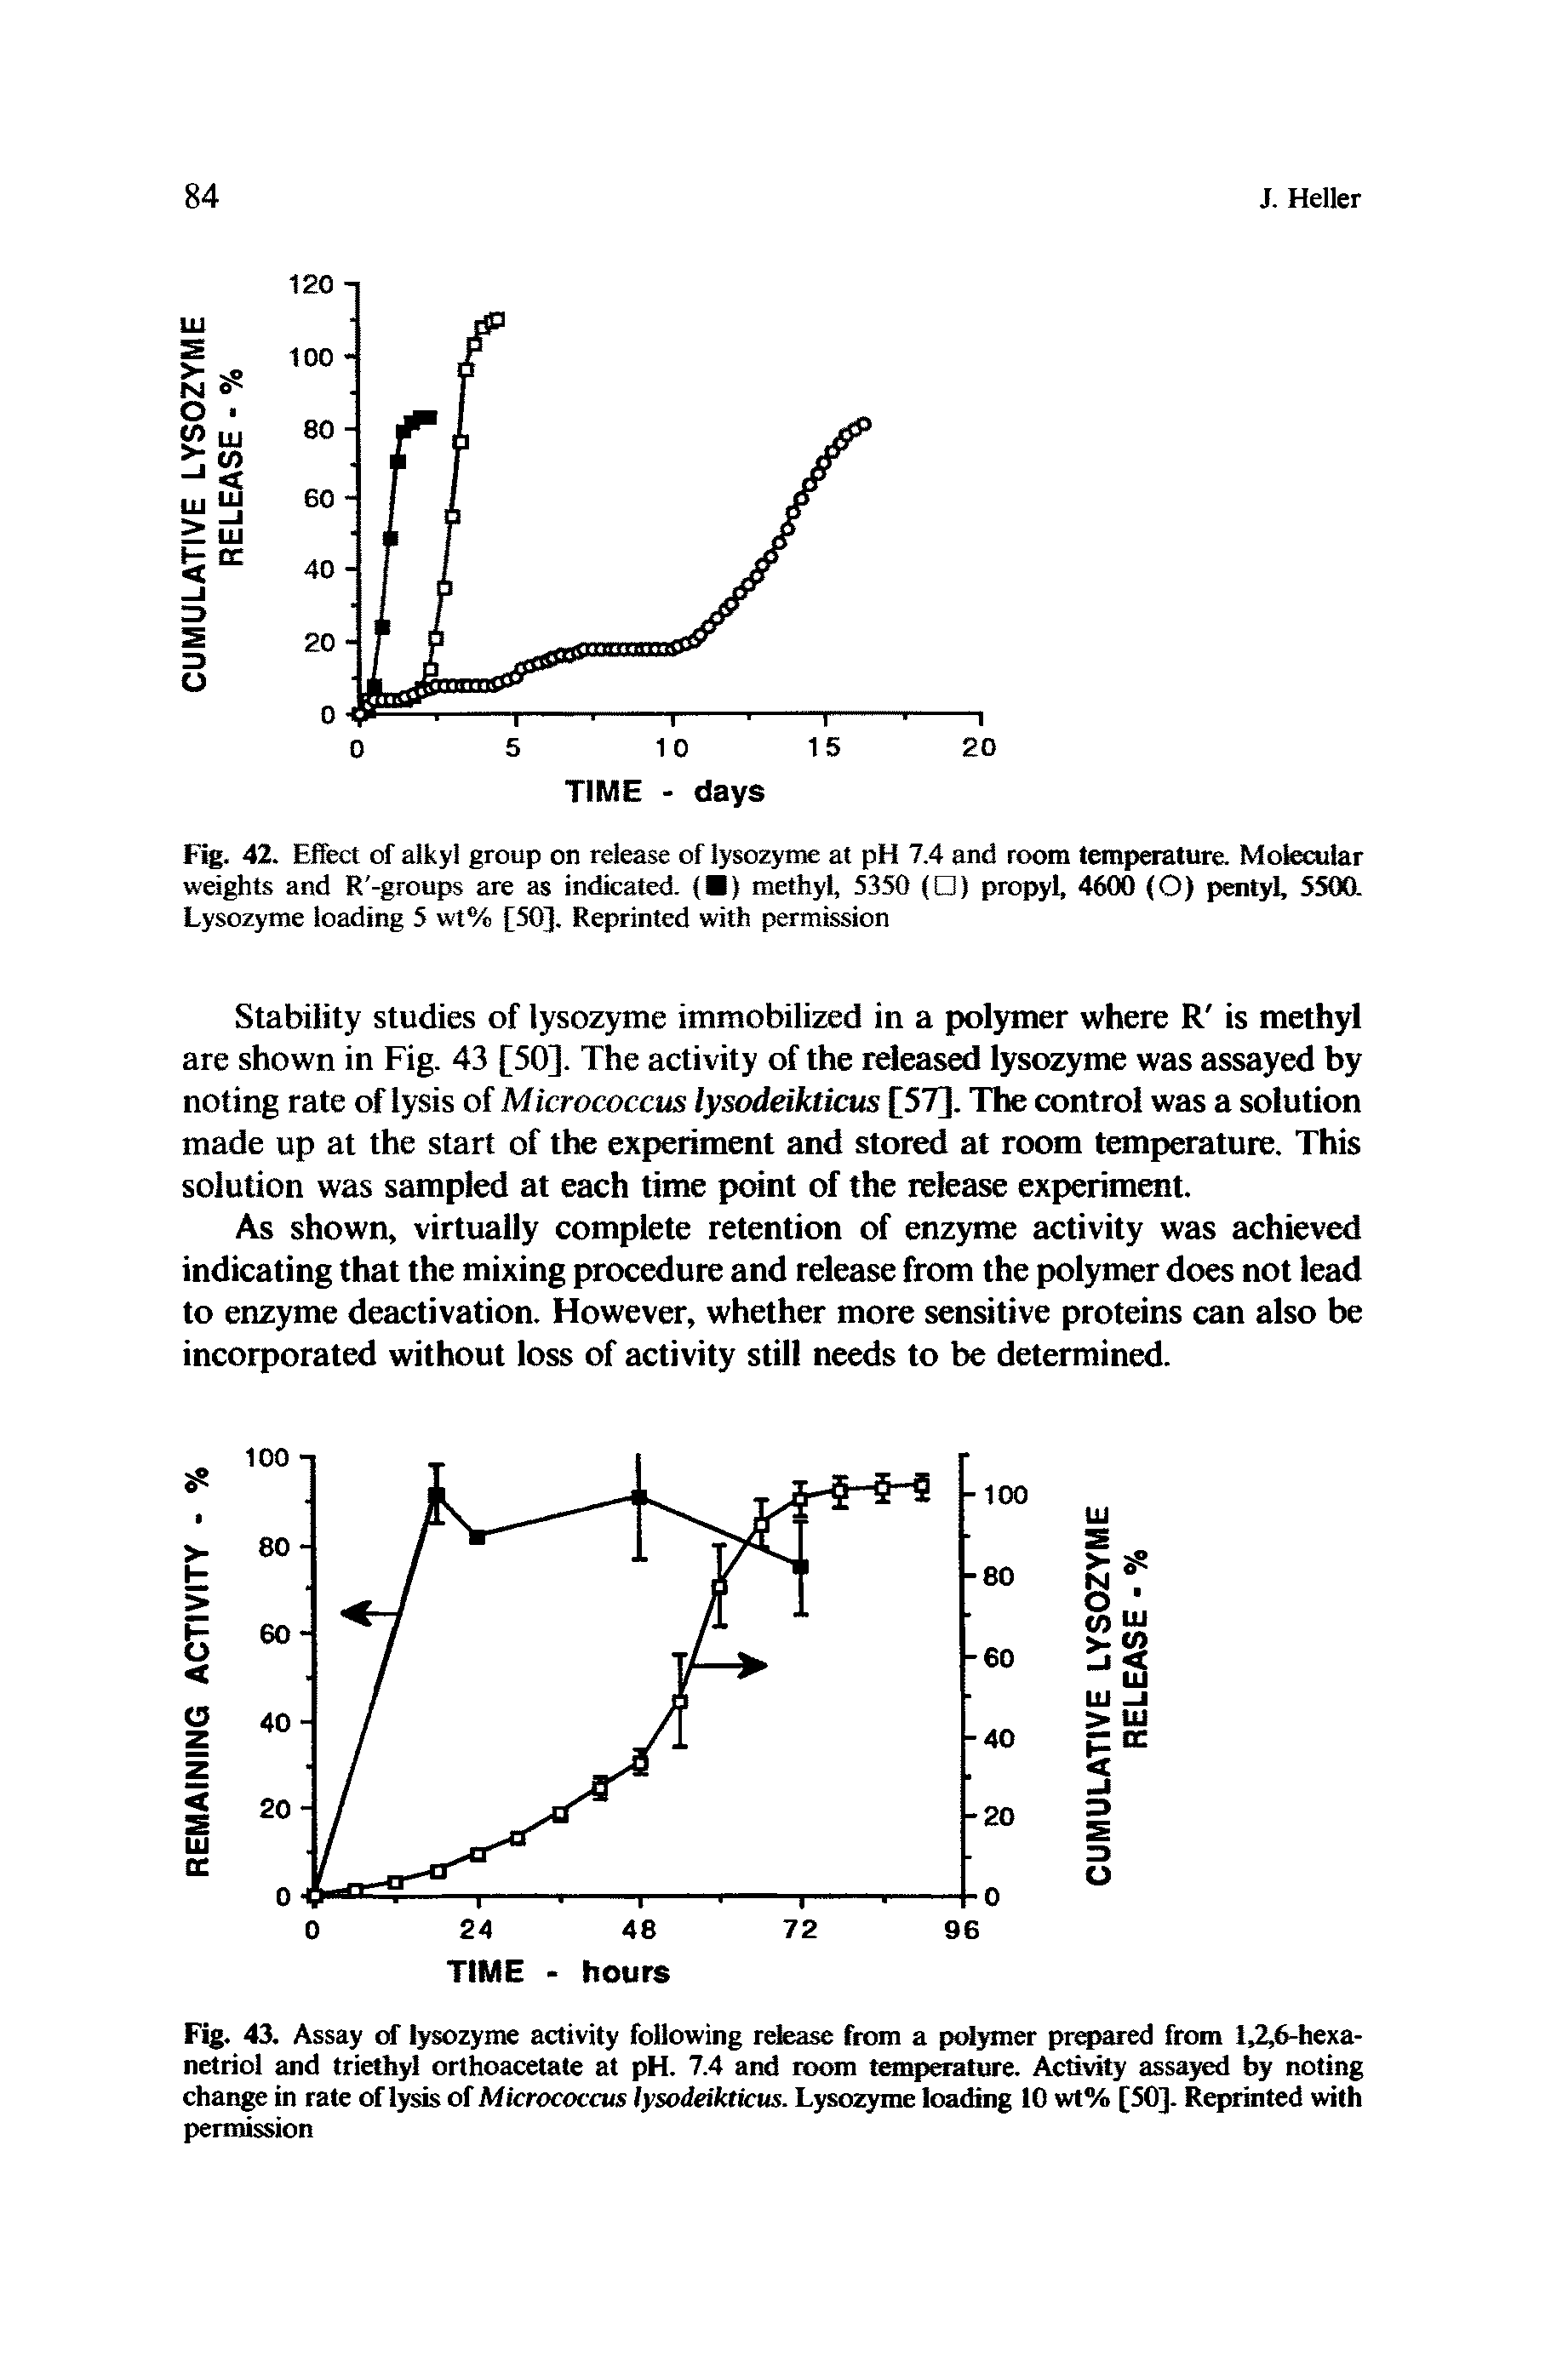 Fig. 43. Assay of lysozyme activity following release from a polymer prepared from 1,2,6-hexa-netriol and triethyl orthoacetate at pH. 7.4 and room temperature. Activity assayed by noting change in rate of lysis of Micrococcus lysodeikticus. Lysozyme loading 10 wt% [50]. Reprinted with permission...